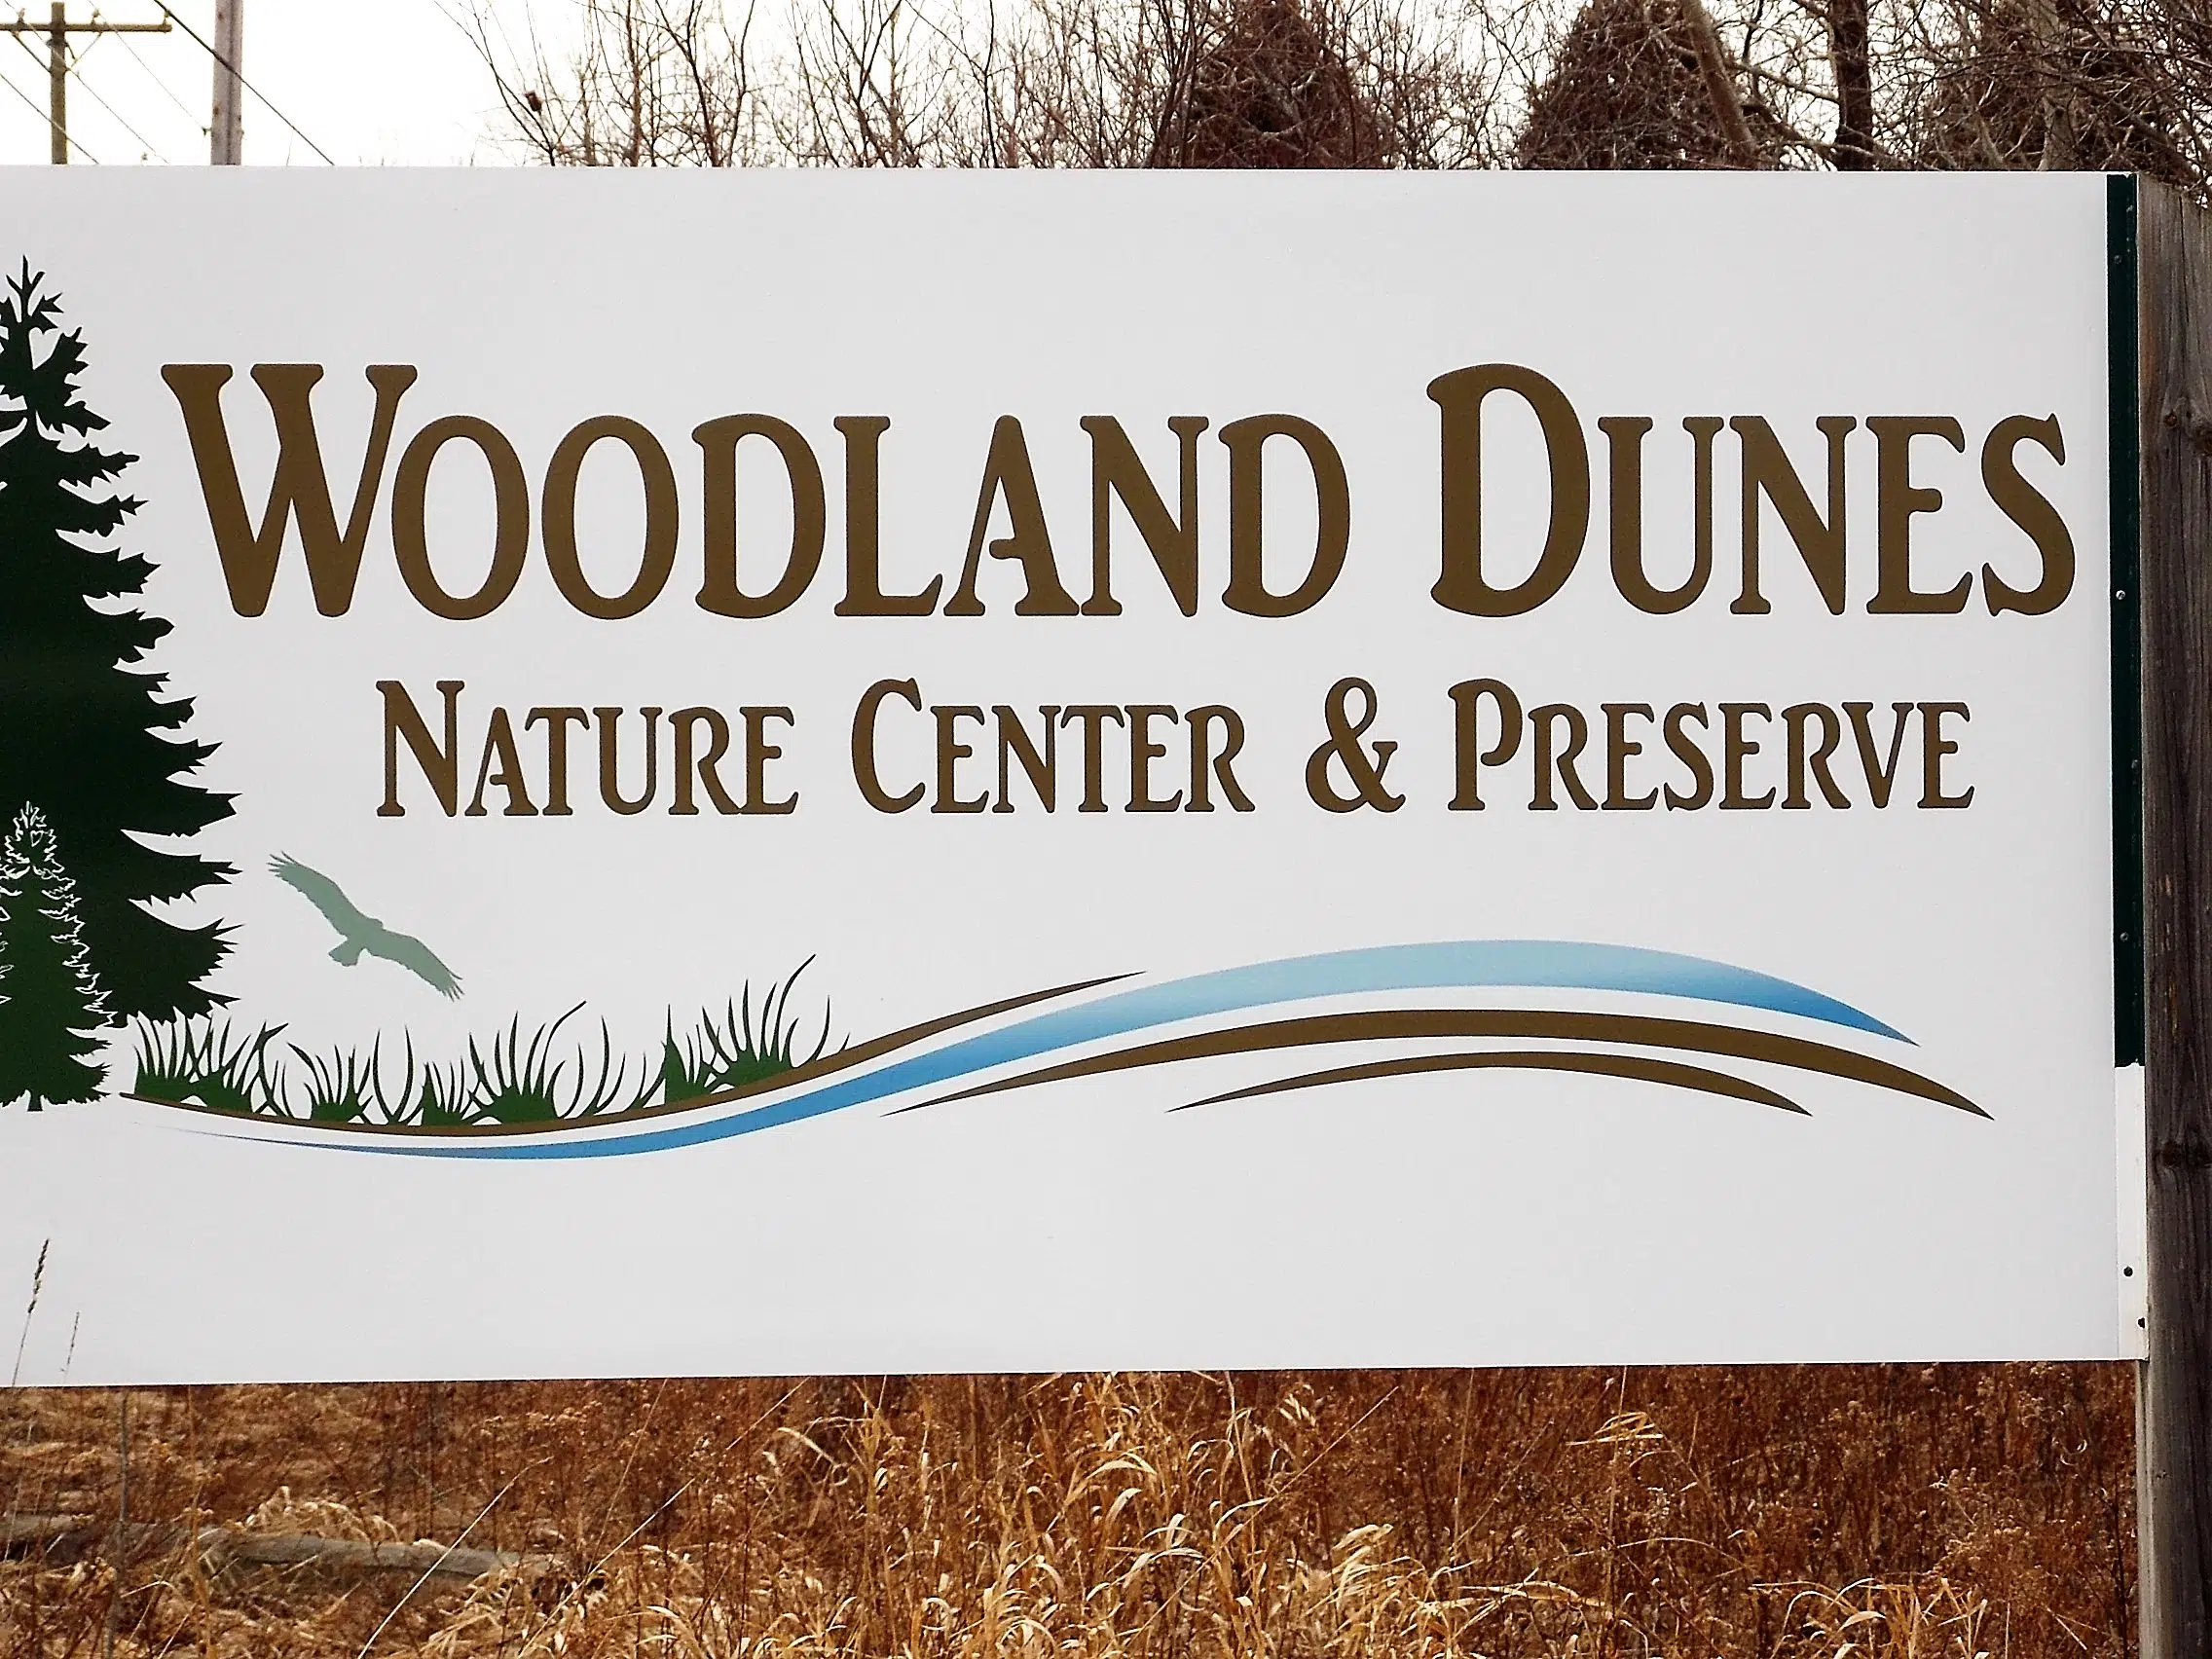 Woodland Dunes to Host a Ribbon Cutting Later This Month